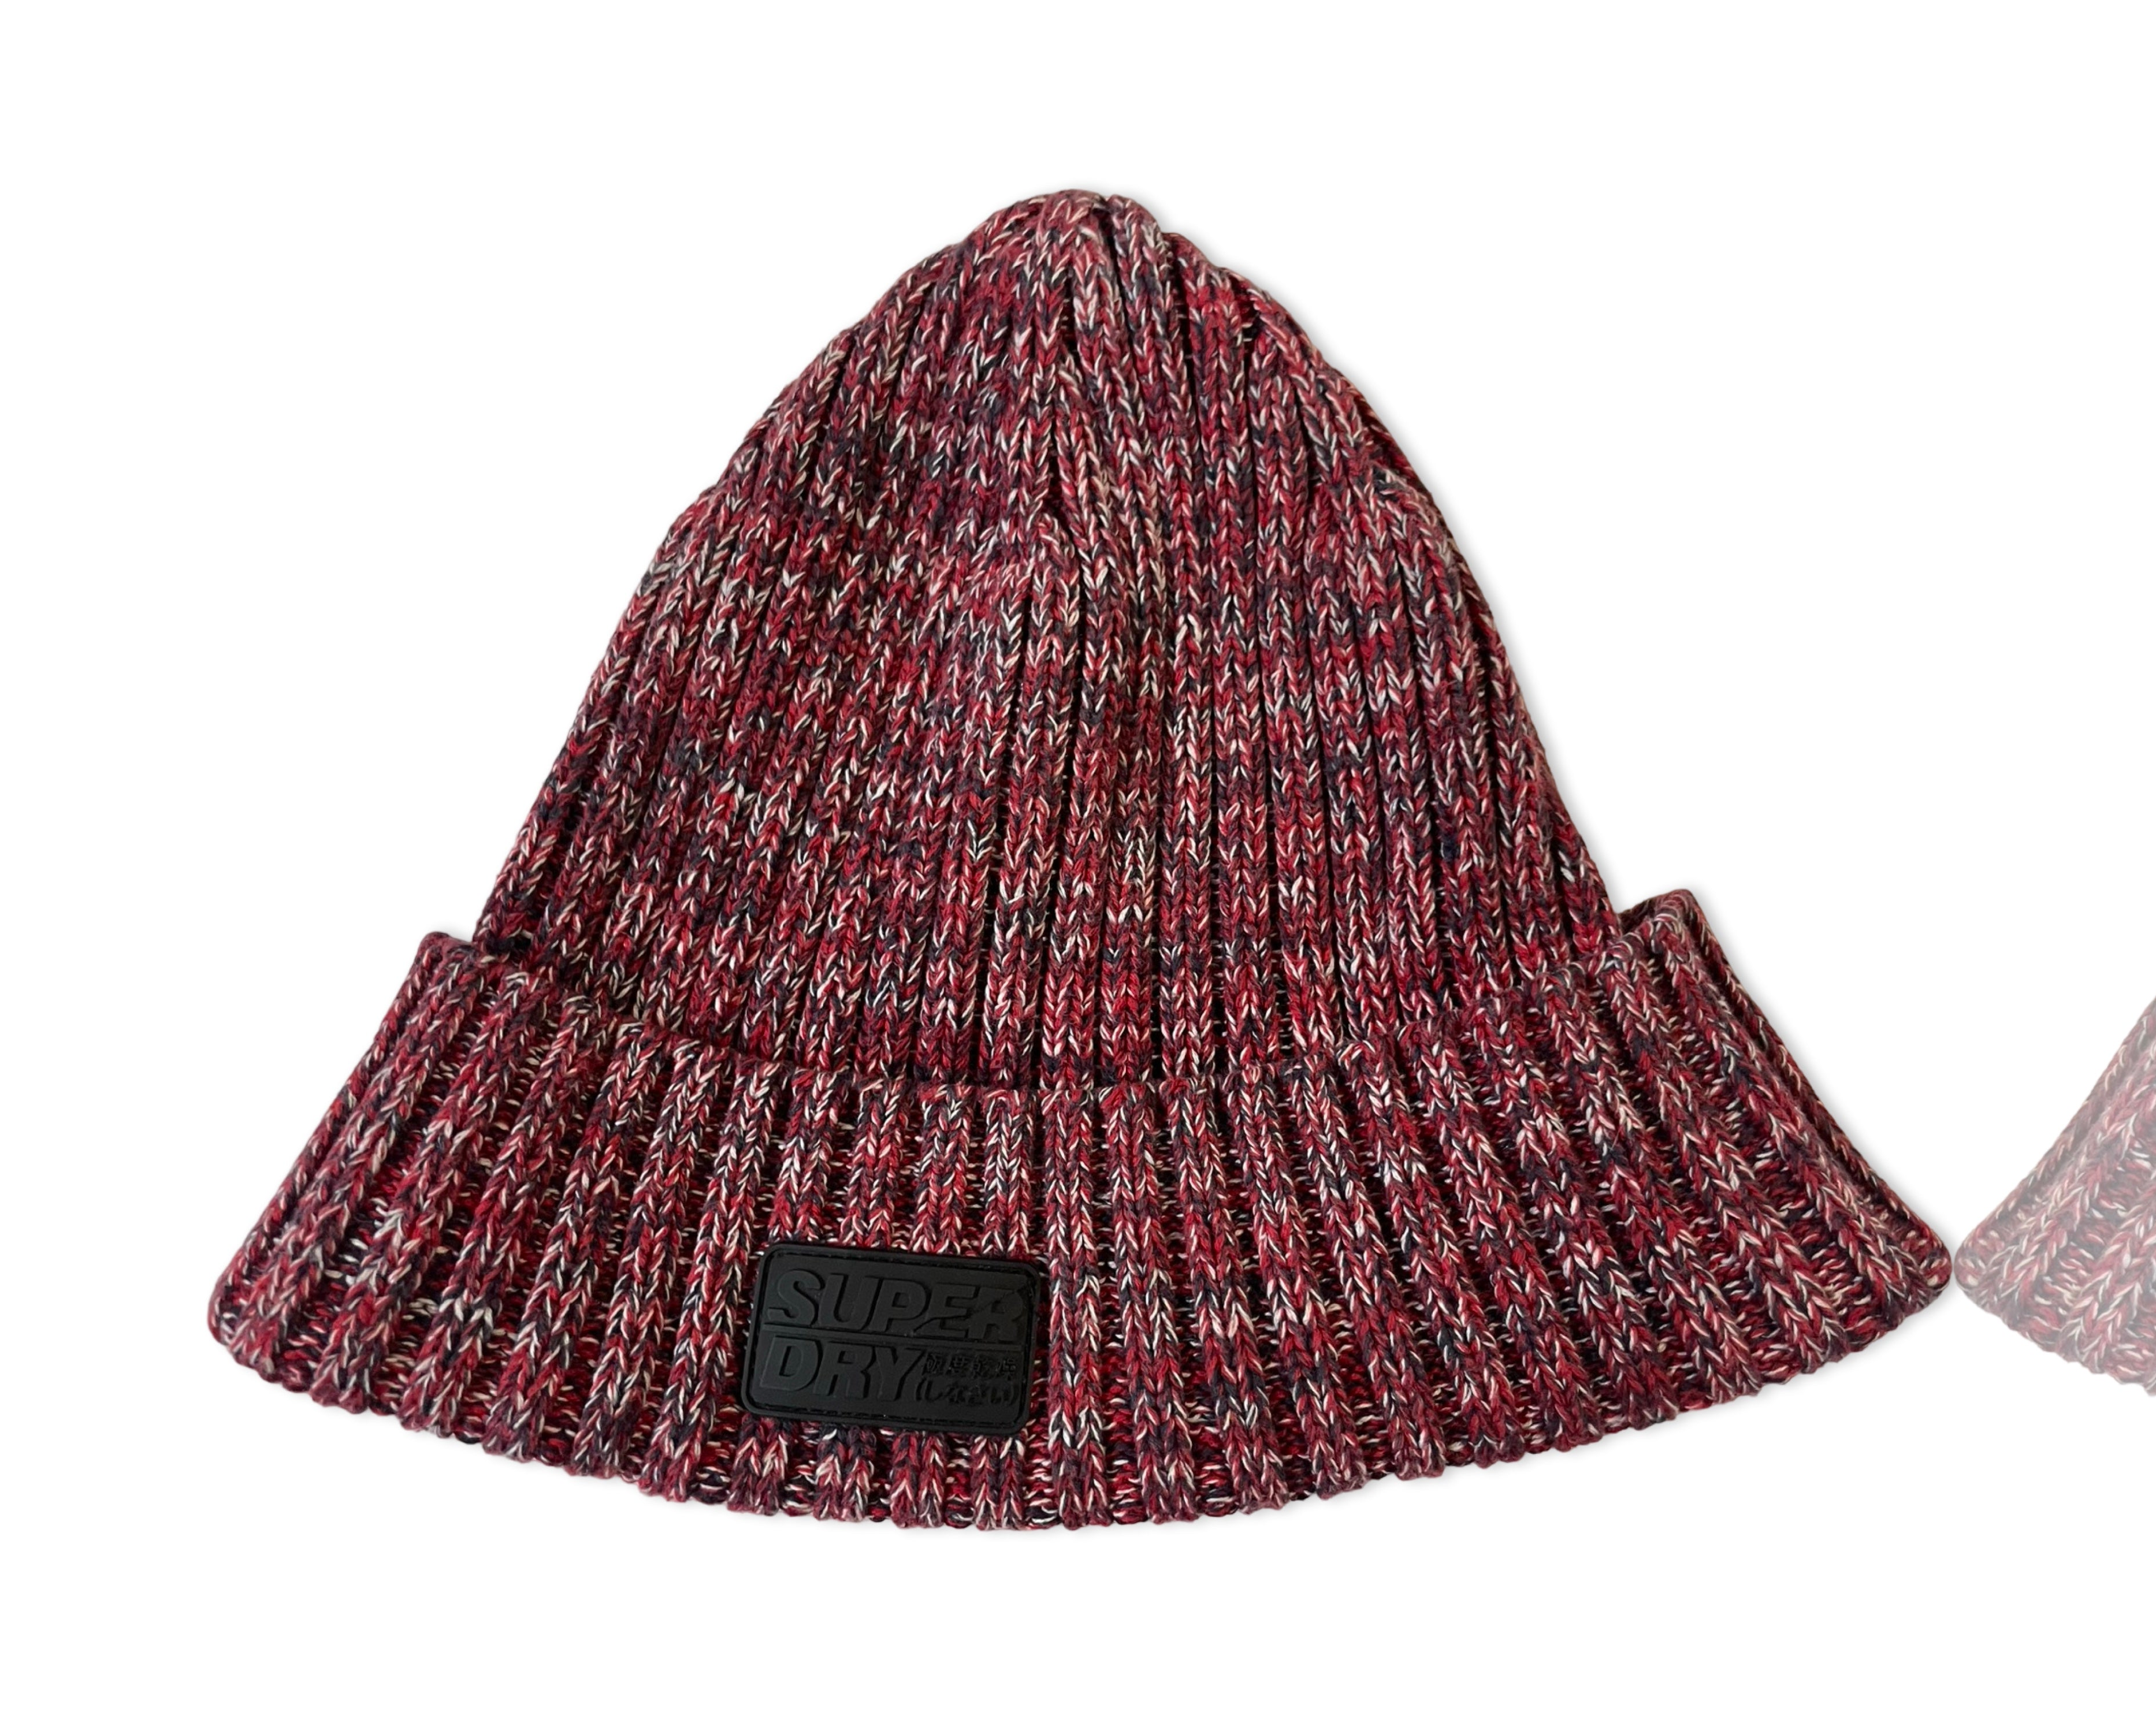 Superdry men's Upstate beanie Solid Ribbed Design Knit Beanie|SKU 4189